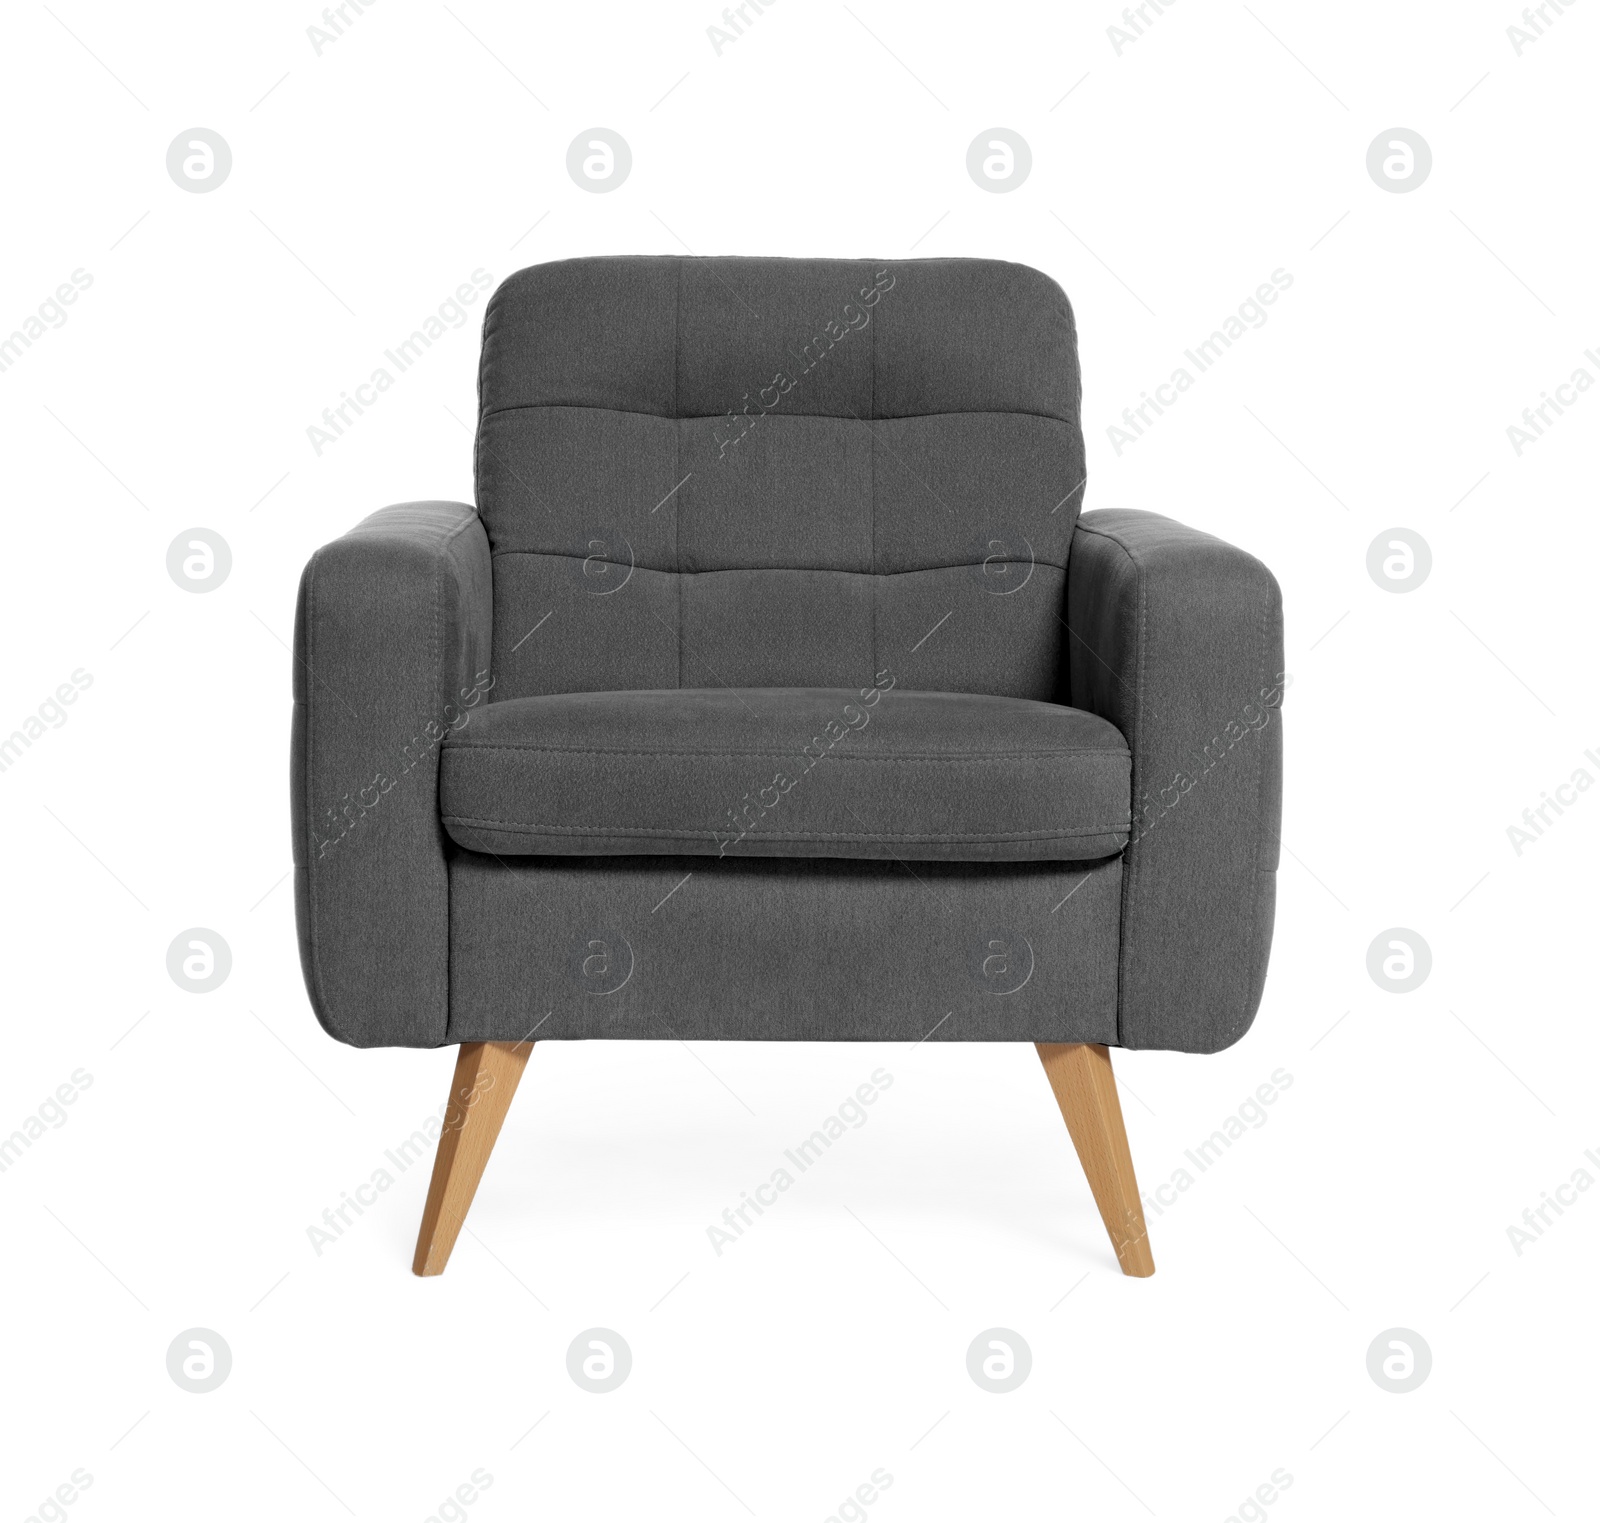 Photo of One stylish comfortable armchair isolated on white